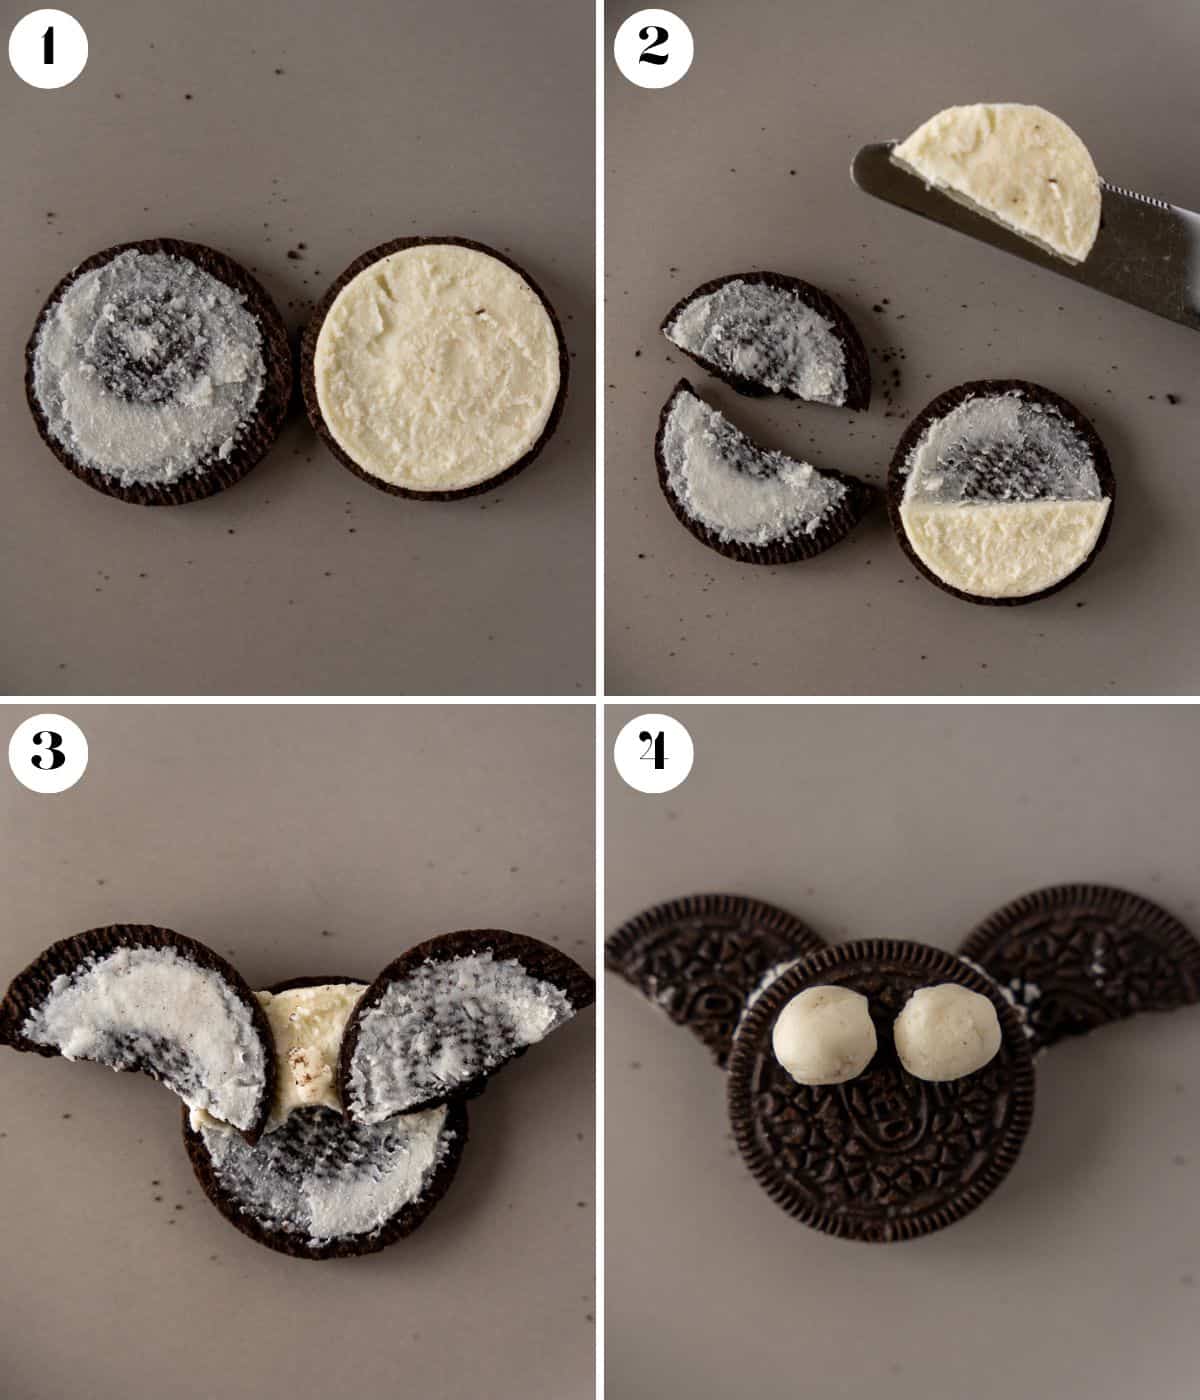 Collage of 4 images showing how to make an Oreo Bat treat.